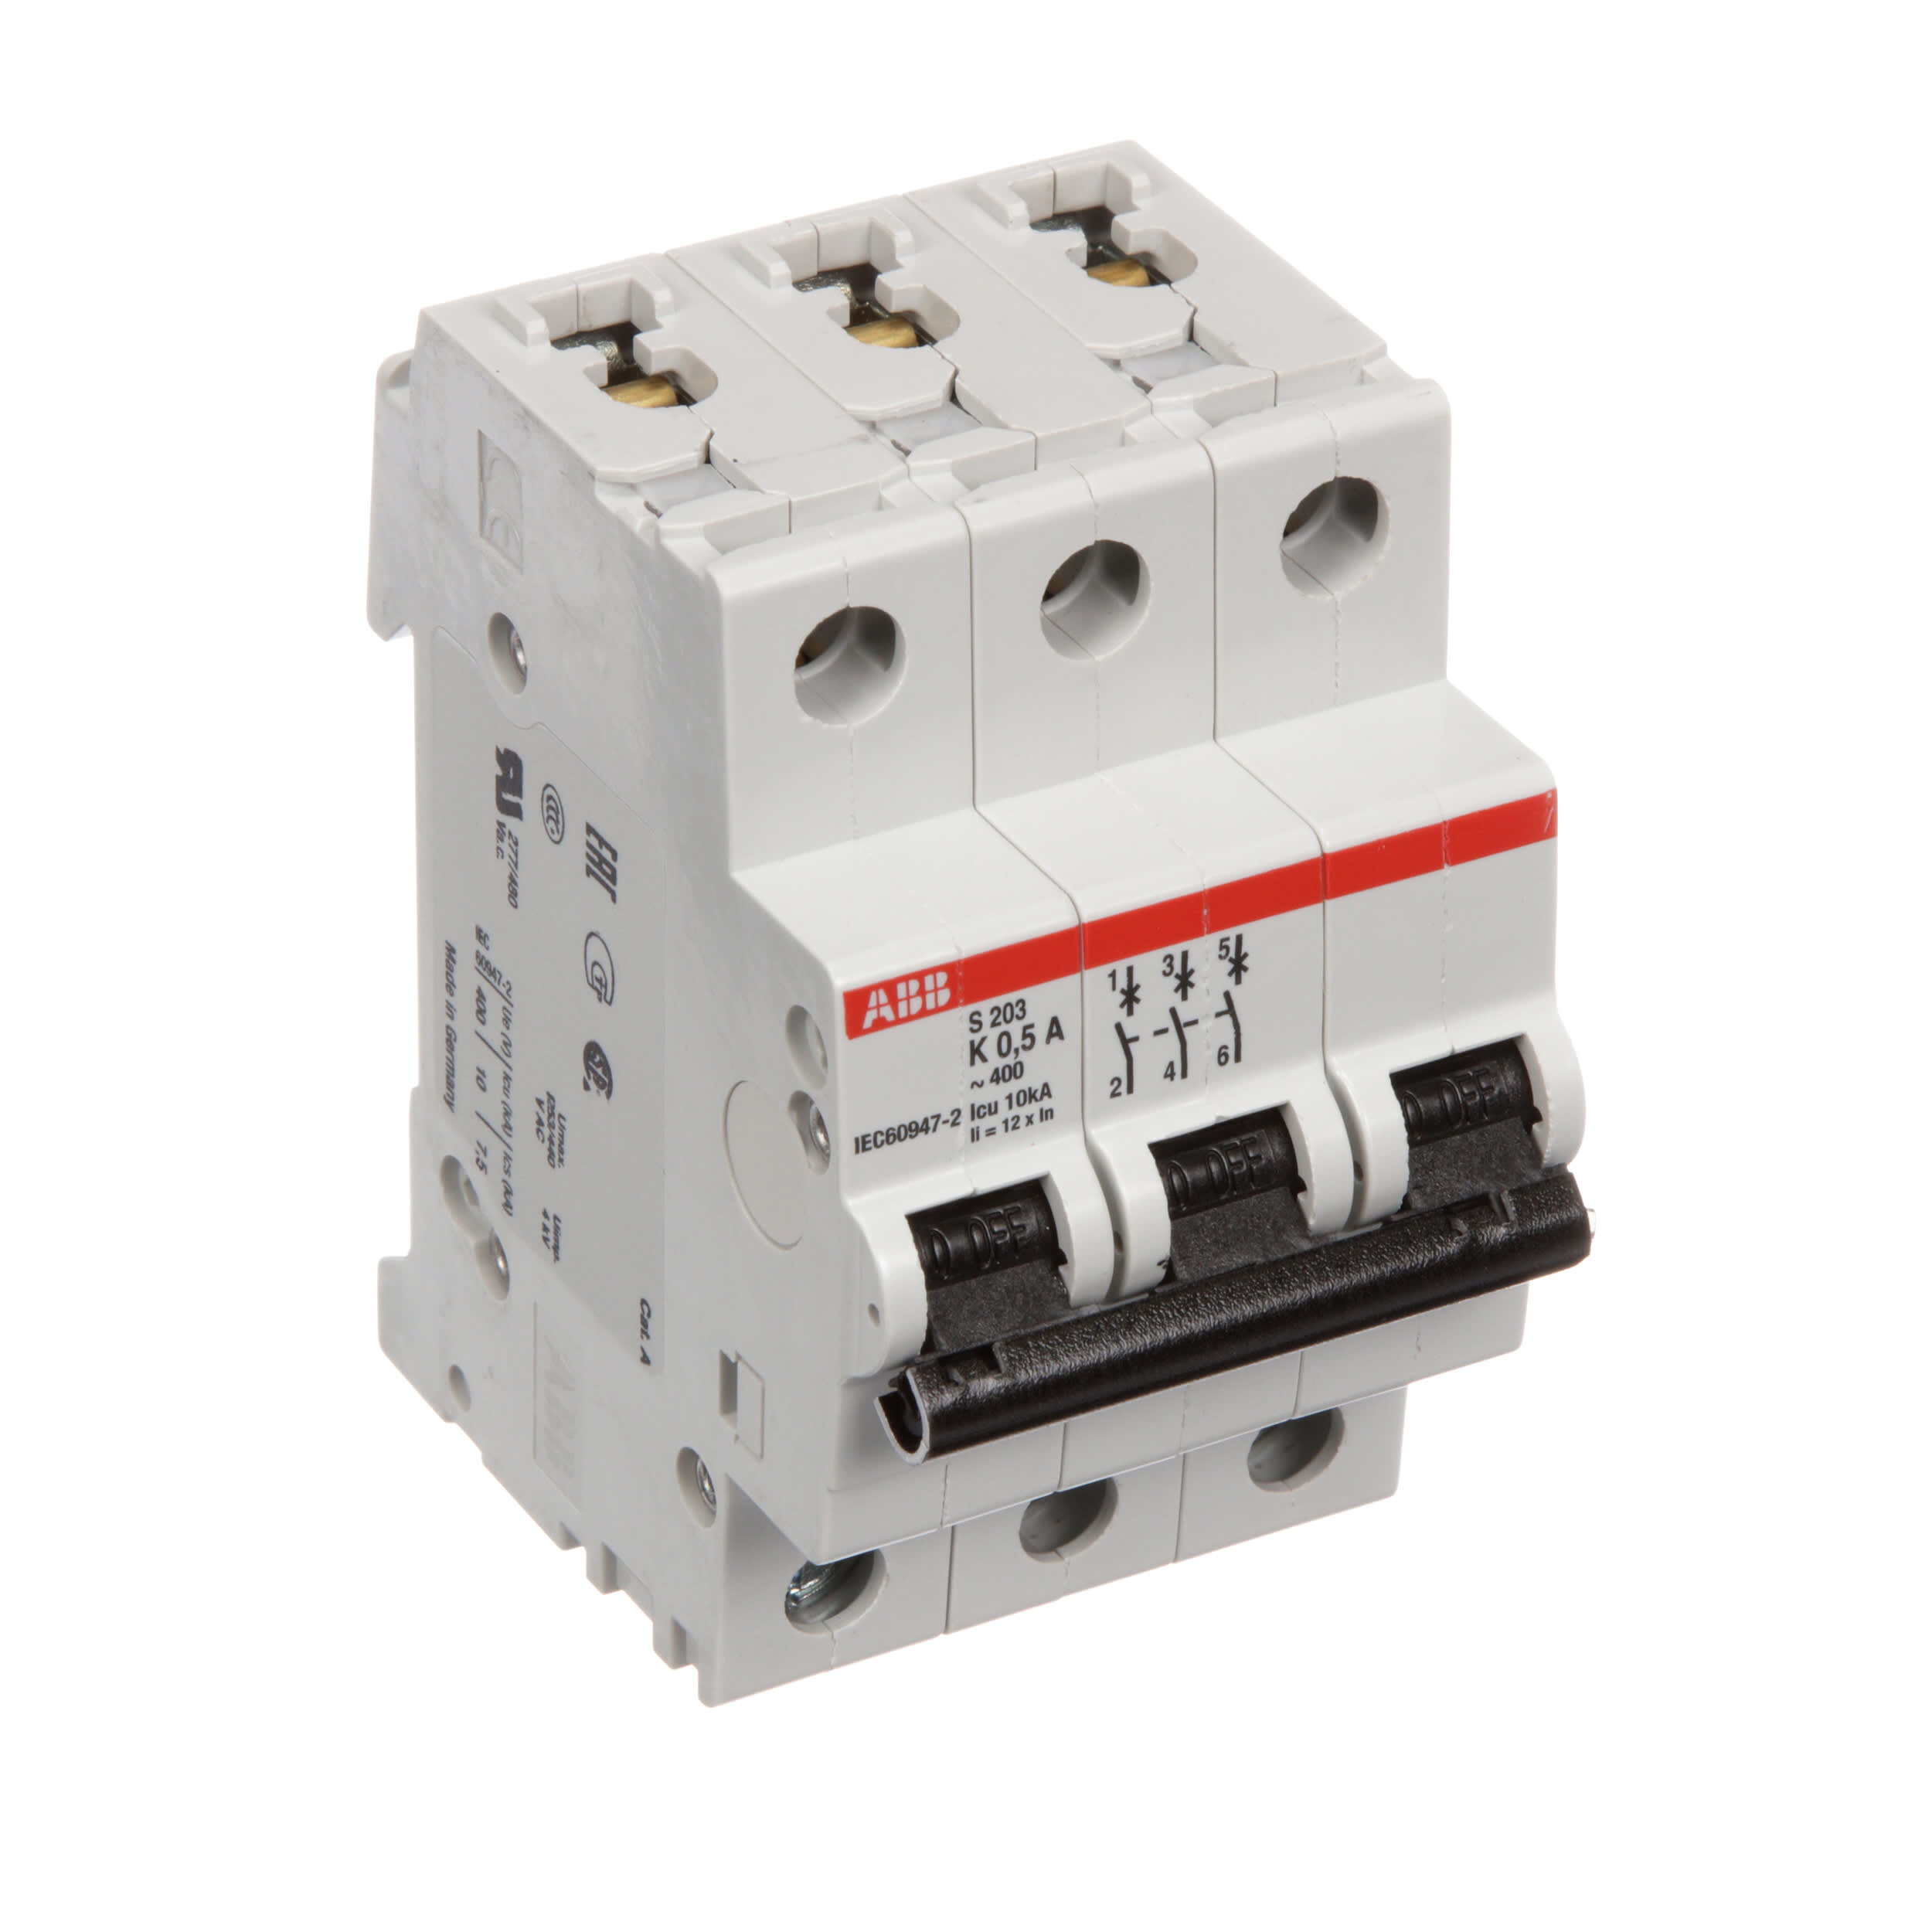 1pcs Used ABB / S203-K0,5 / Circuit Breaker Details about    5A 